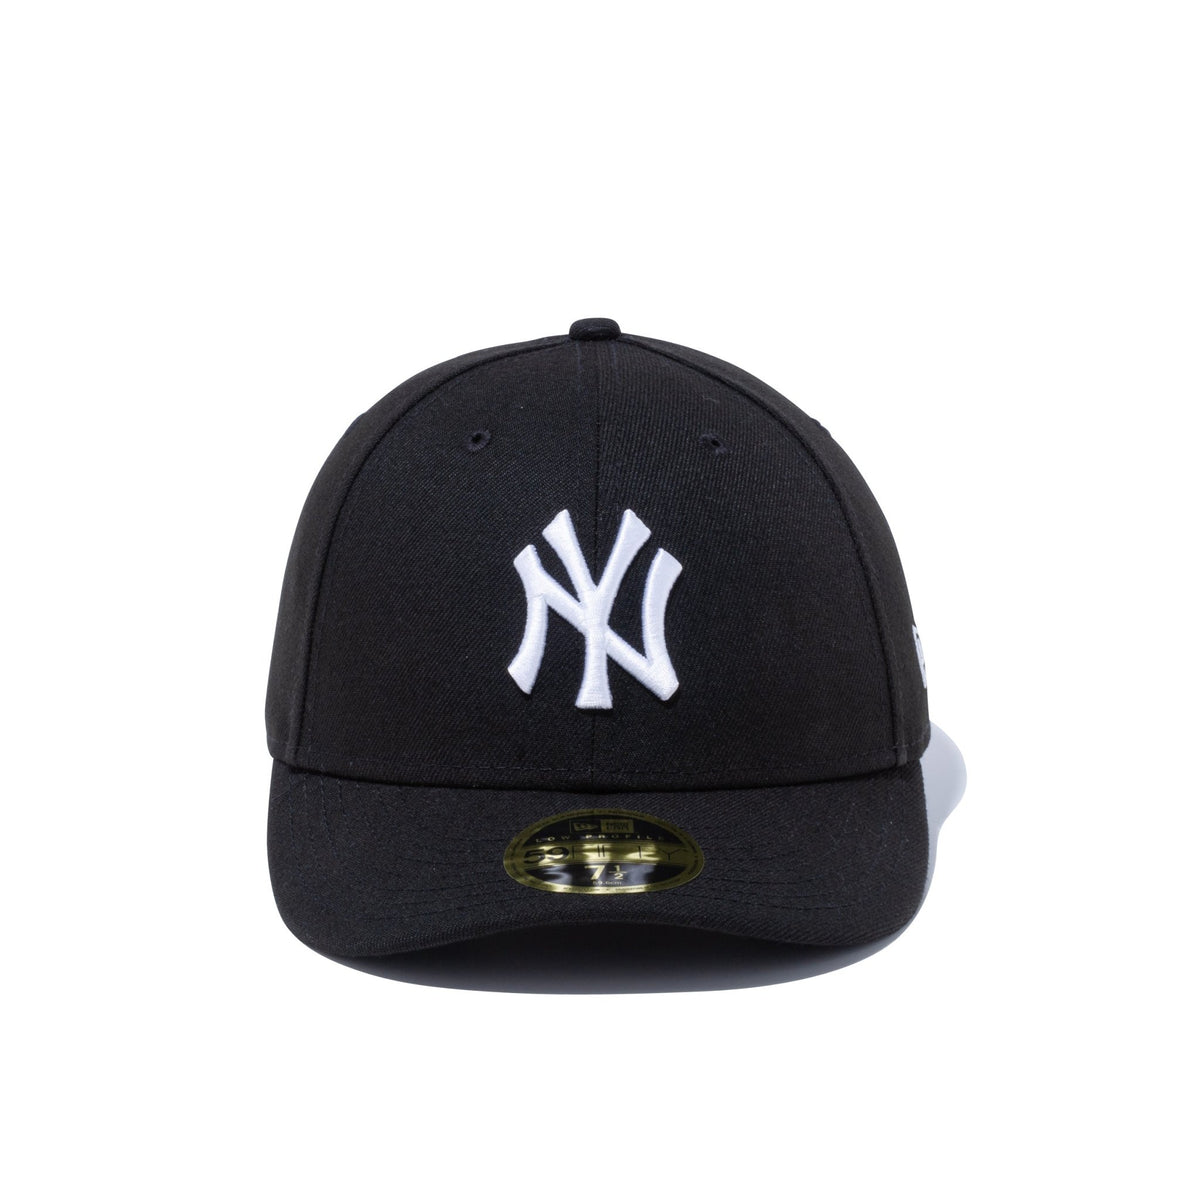 ⑤NEW ERA(R)/Low Profile 59FIFTY(R) ヤンキース